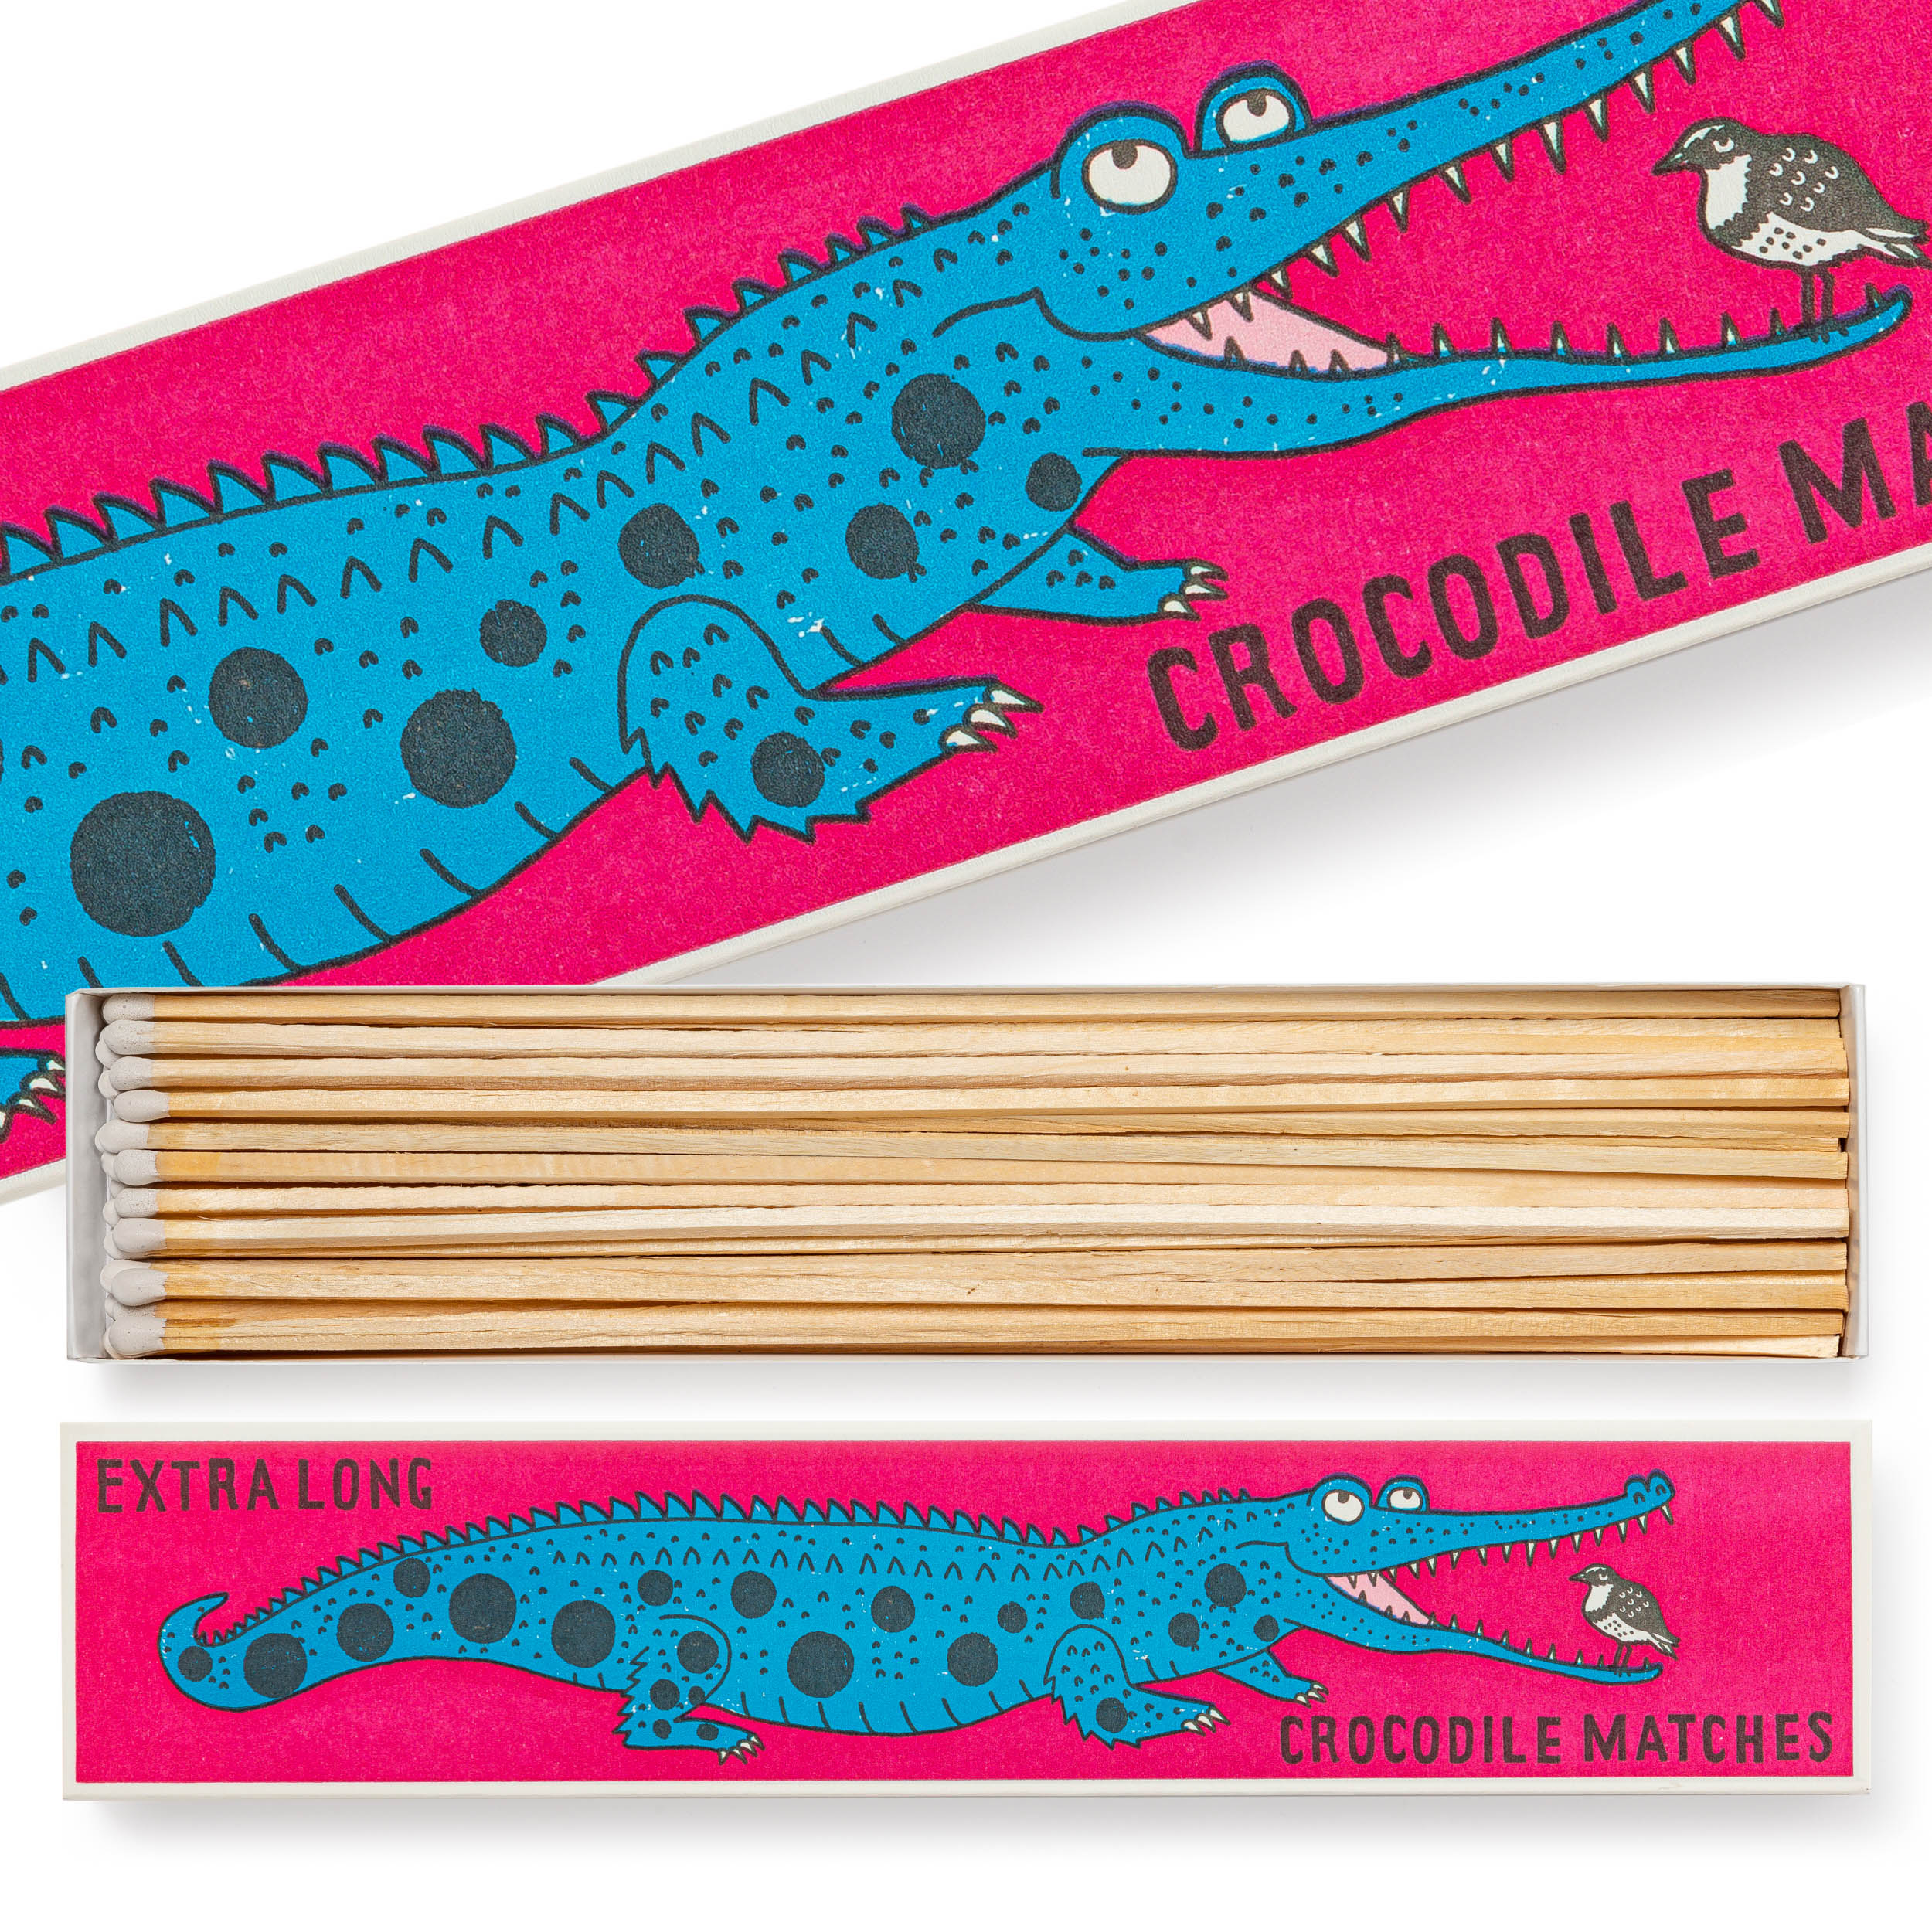 Crocodile Matches - Long Matchboxes - Charlotte Farmer - from Archivist Gallery 